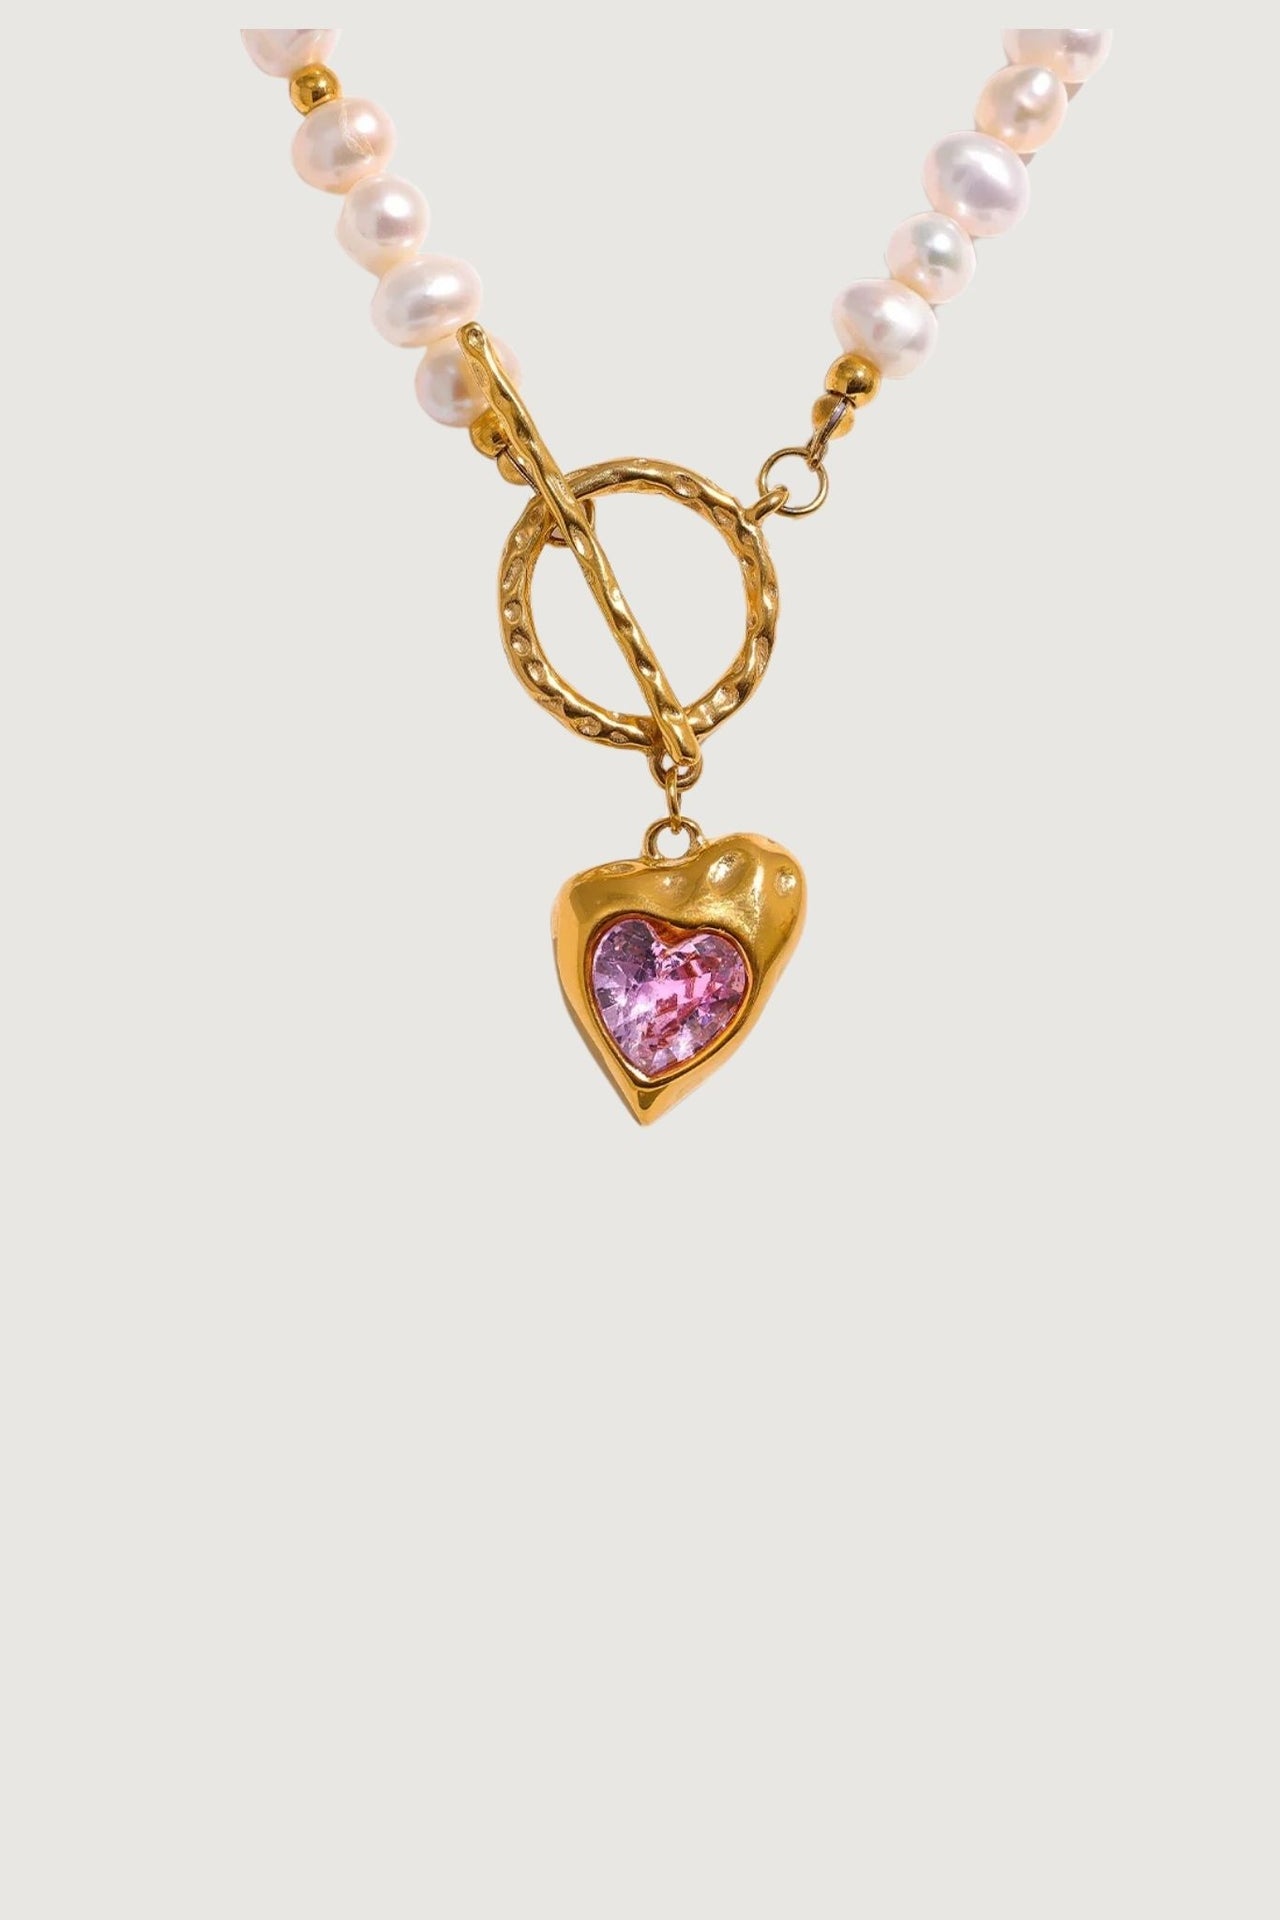 GOLD HEART FRESH WATER PEARL NECKLACE PINK STONE